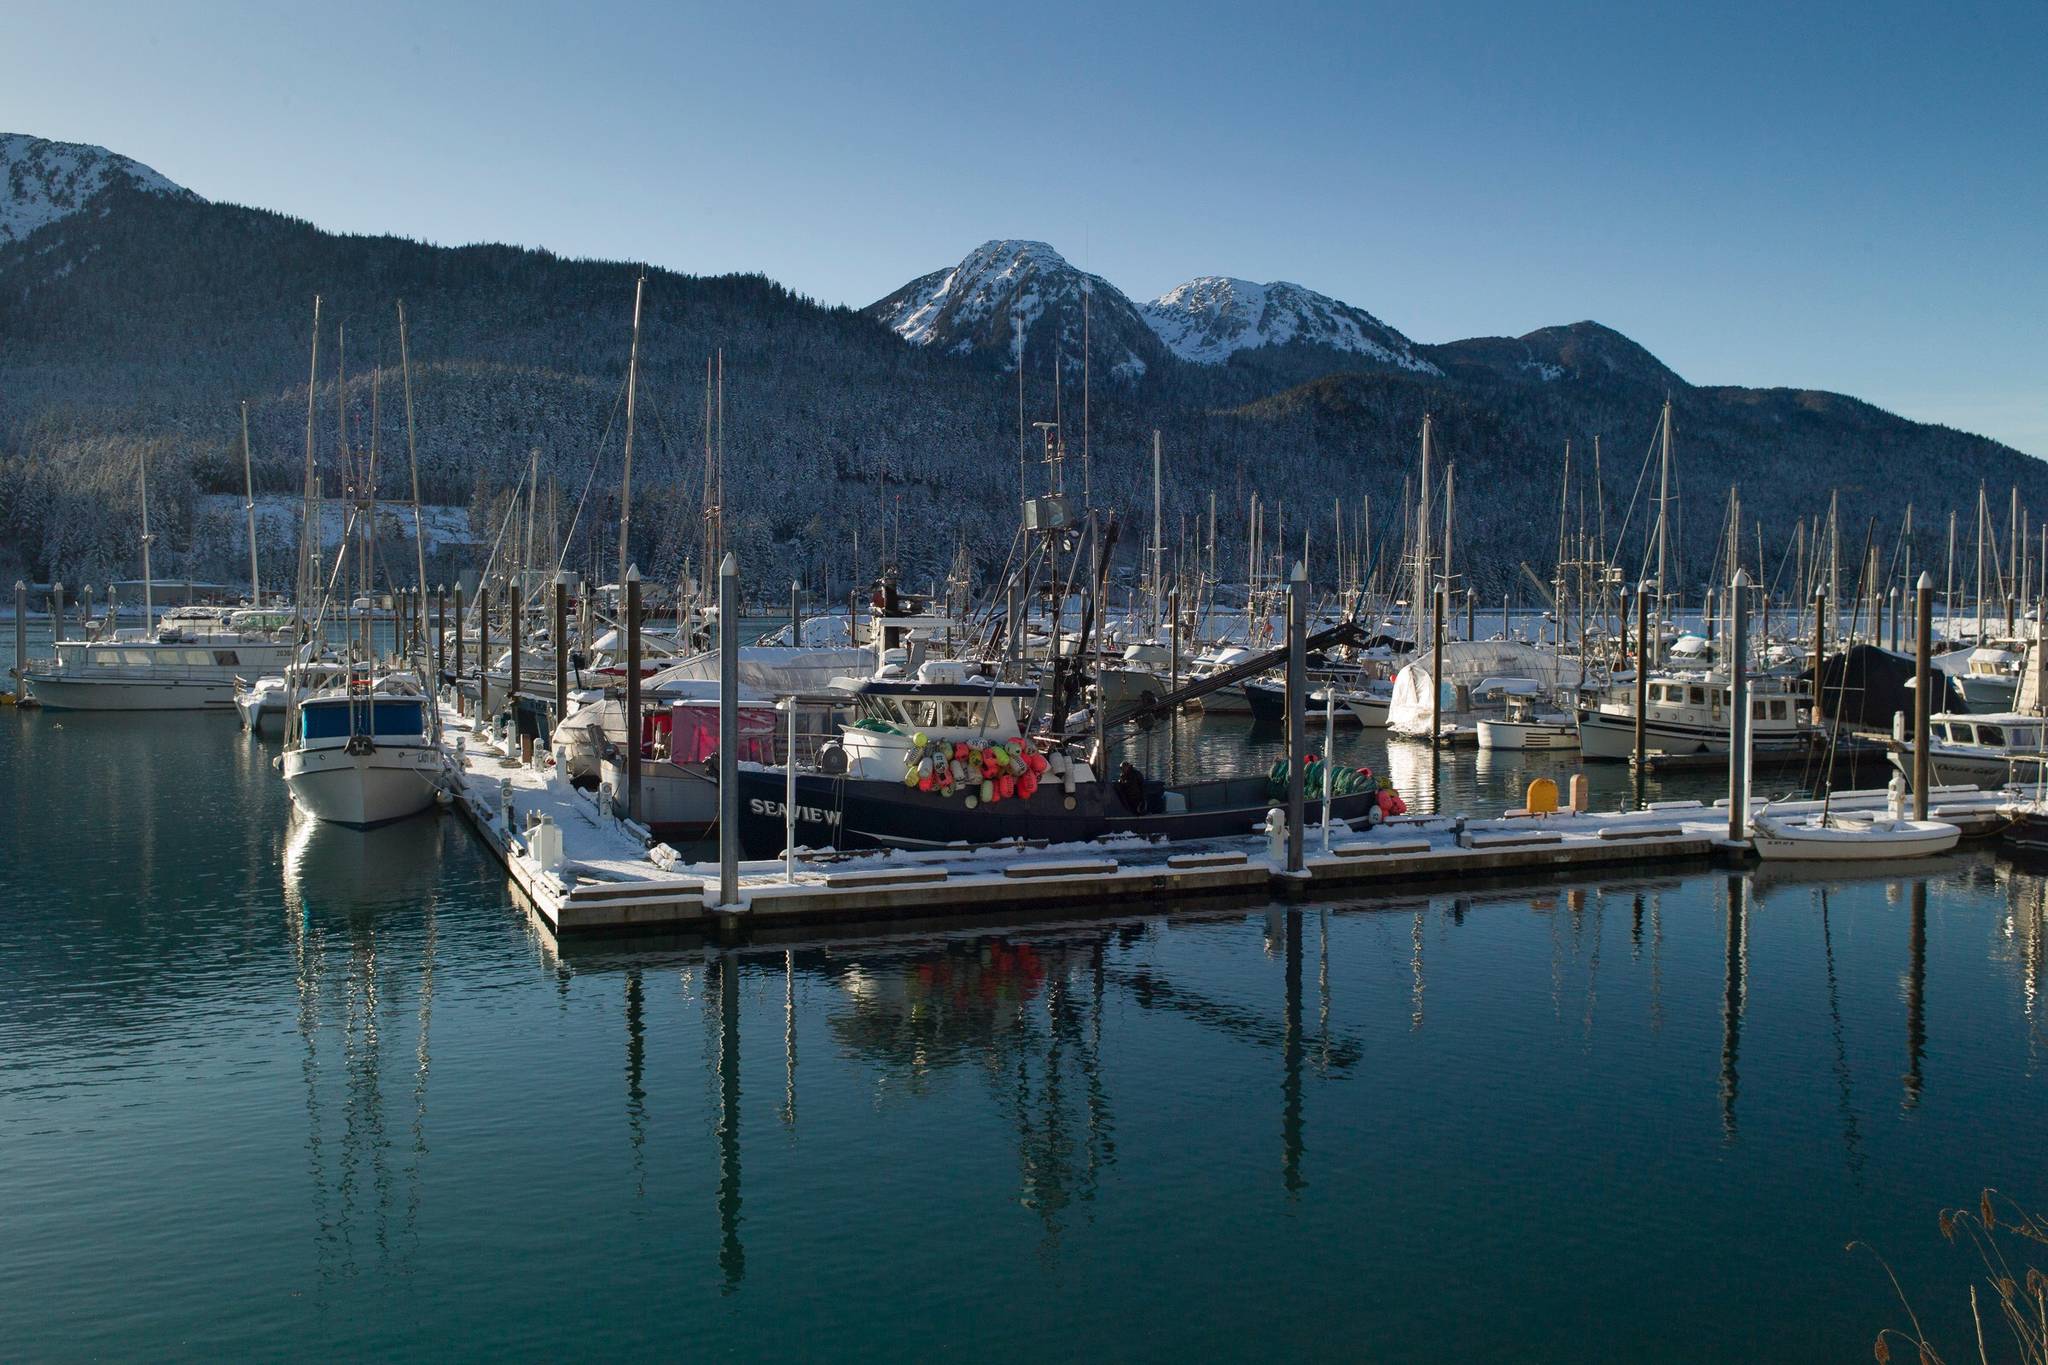 Harris Harbor on Friday, Feb. 8, 2019. David Little, 67, who lived aboard the boat Quality Time, was found dead in the water next to his boat in Harris Harbor on Saturday, Feb. 2, 2019. (Michael Penn | Juneau Empire)